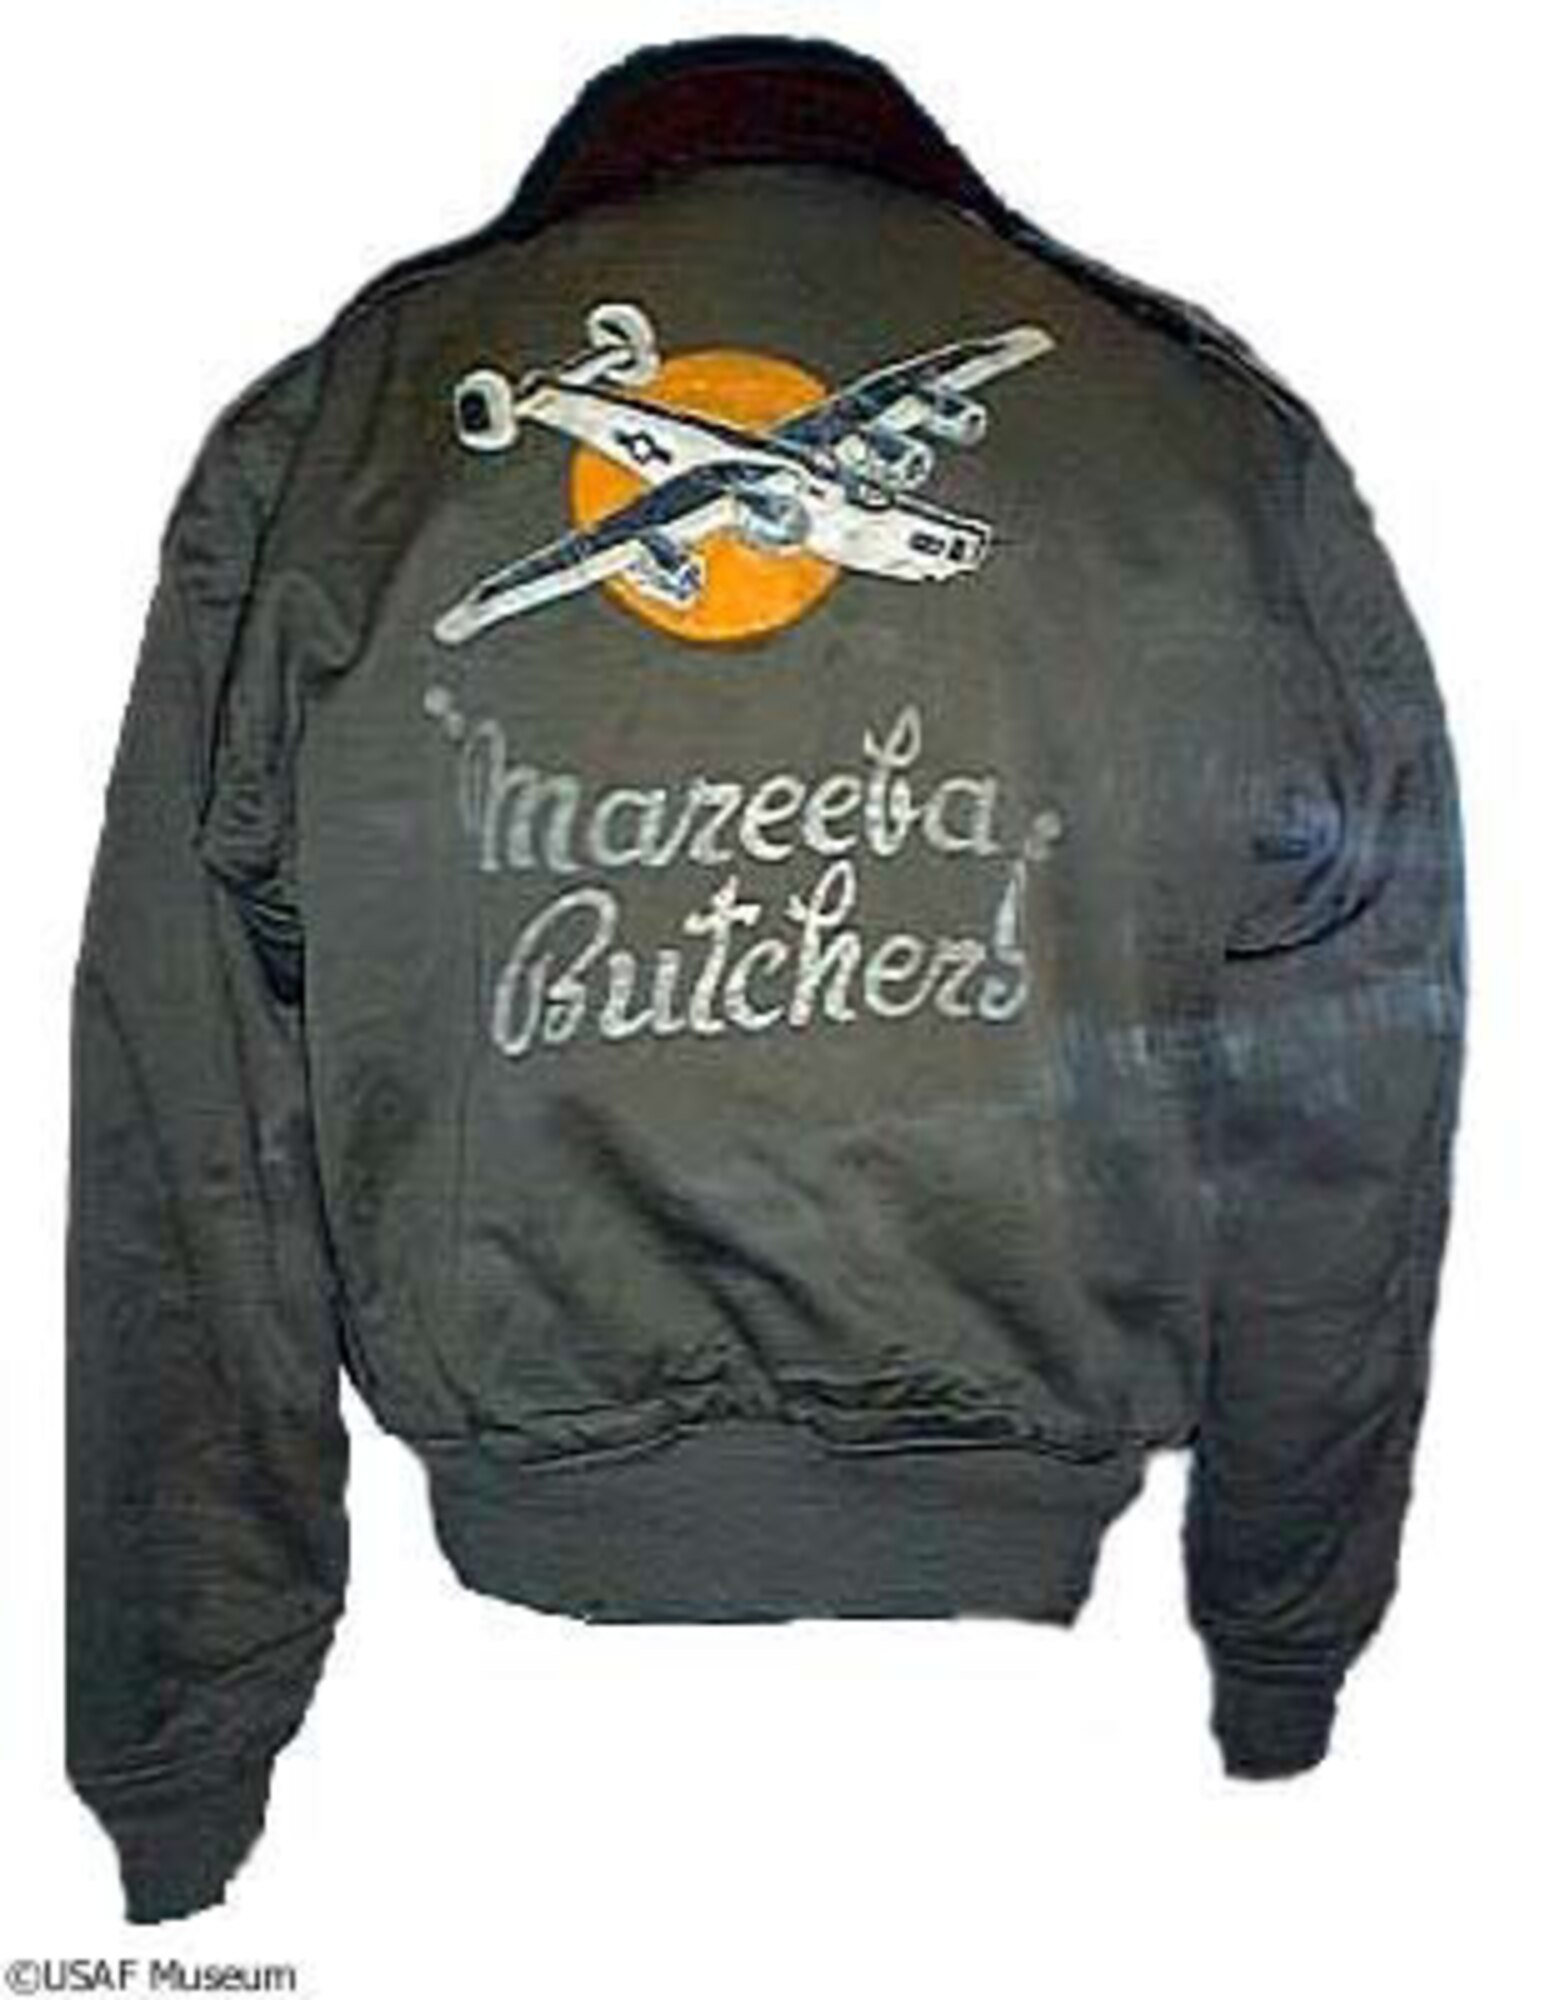 DAYTON, Ohio -- Mareeba Butchers aviator jacket on display at the National Museum of the United States Air Force. (U.S. Air Force photo)